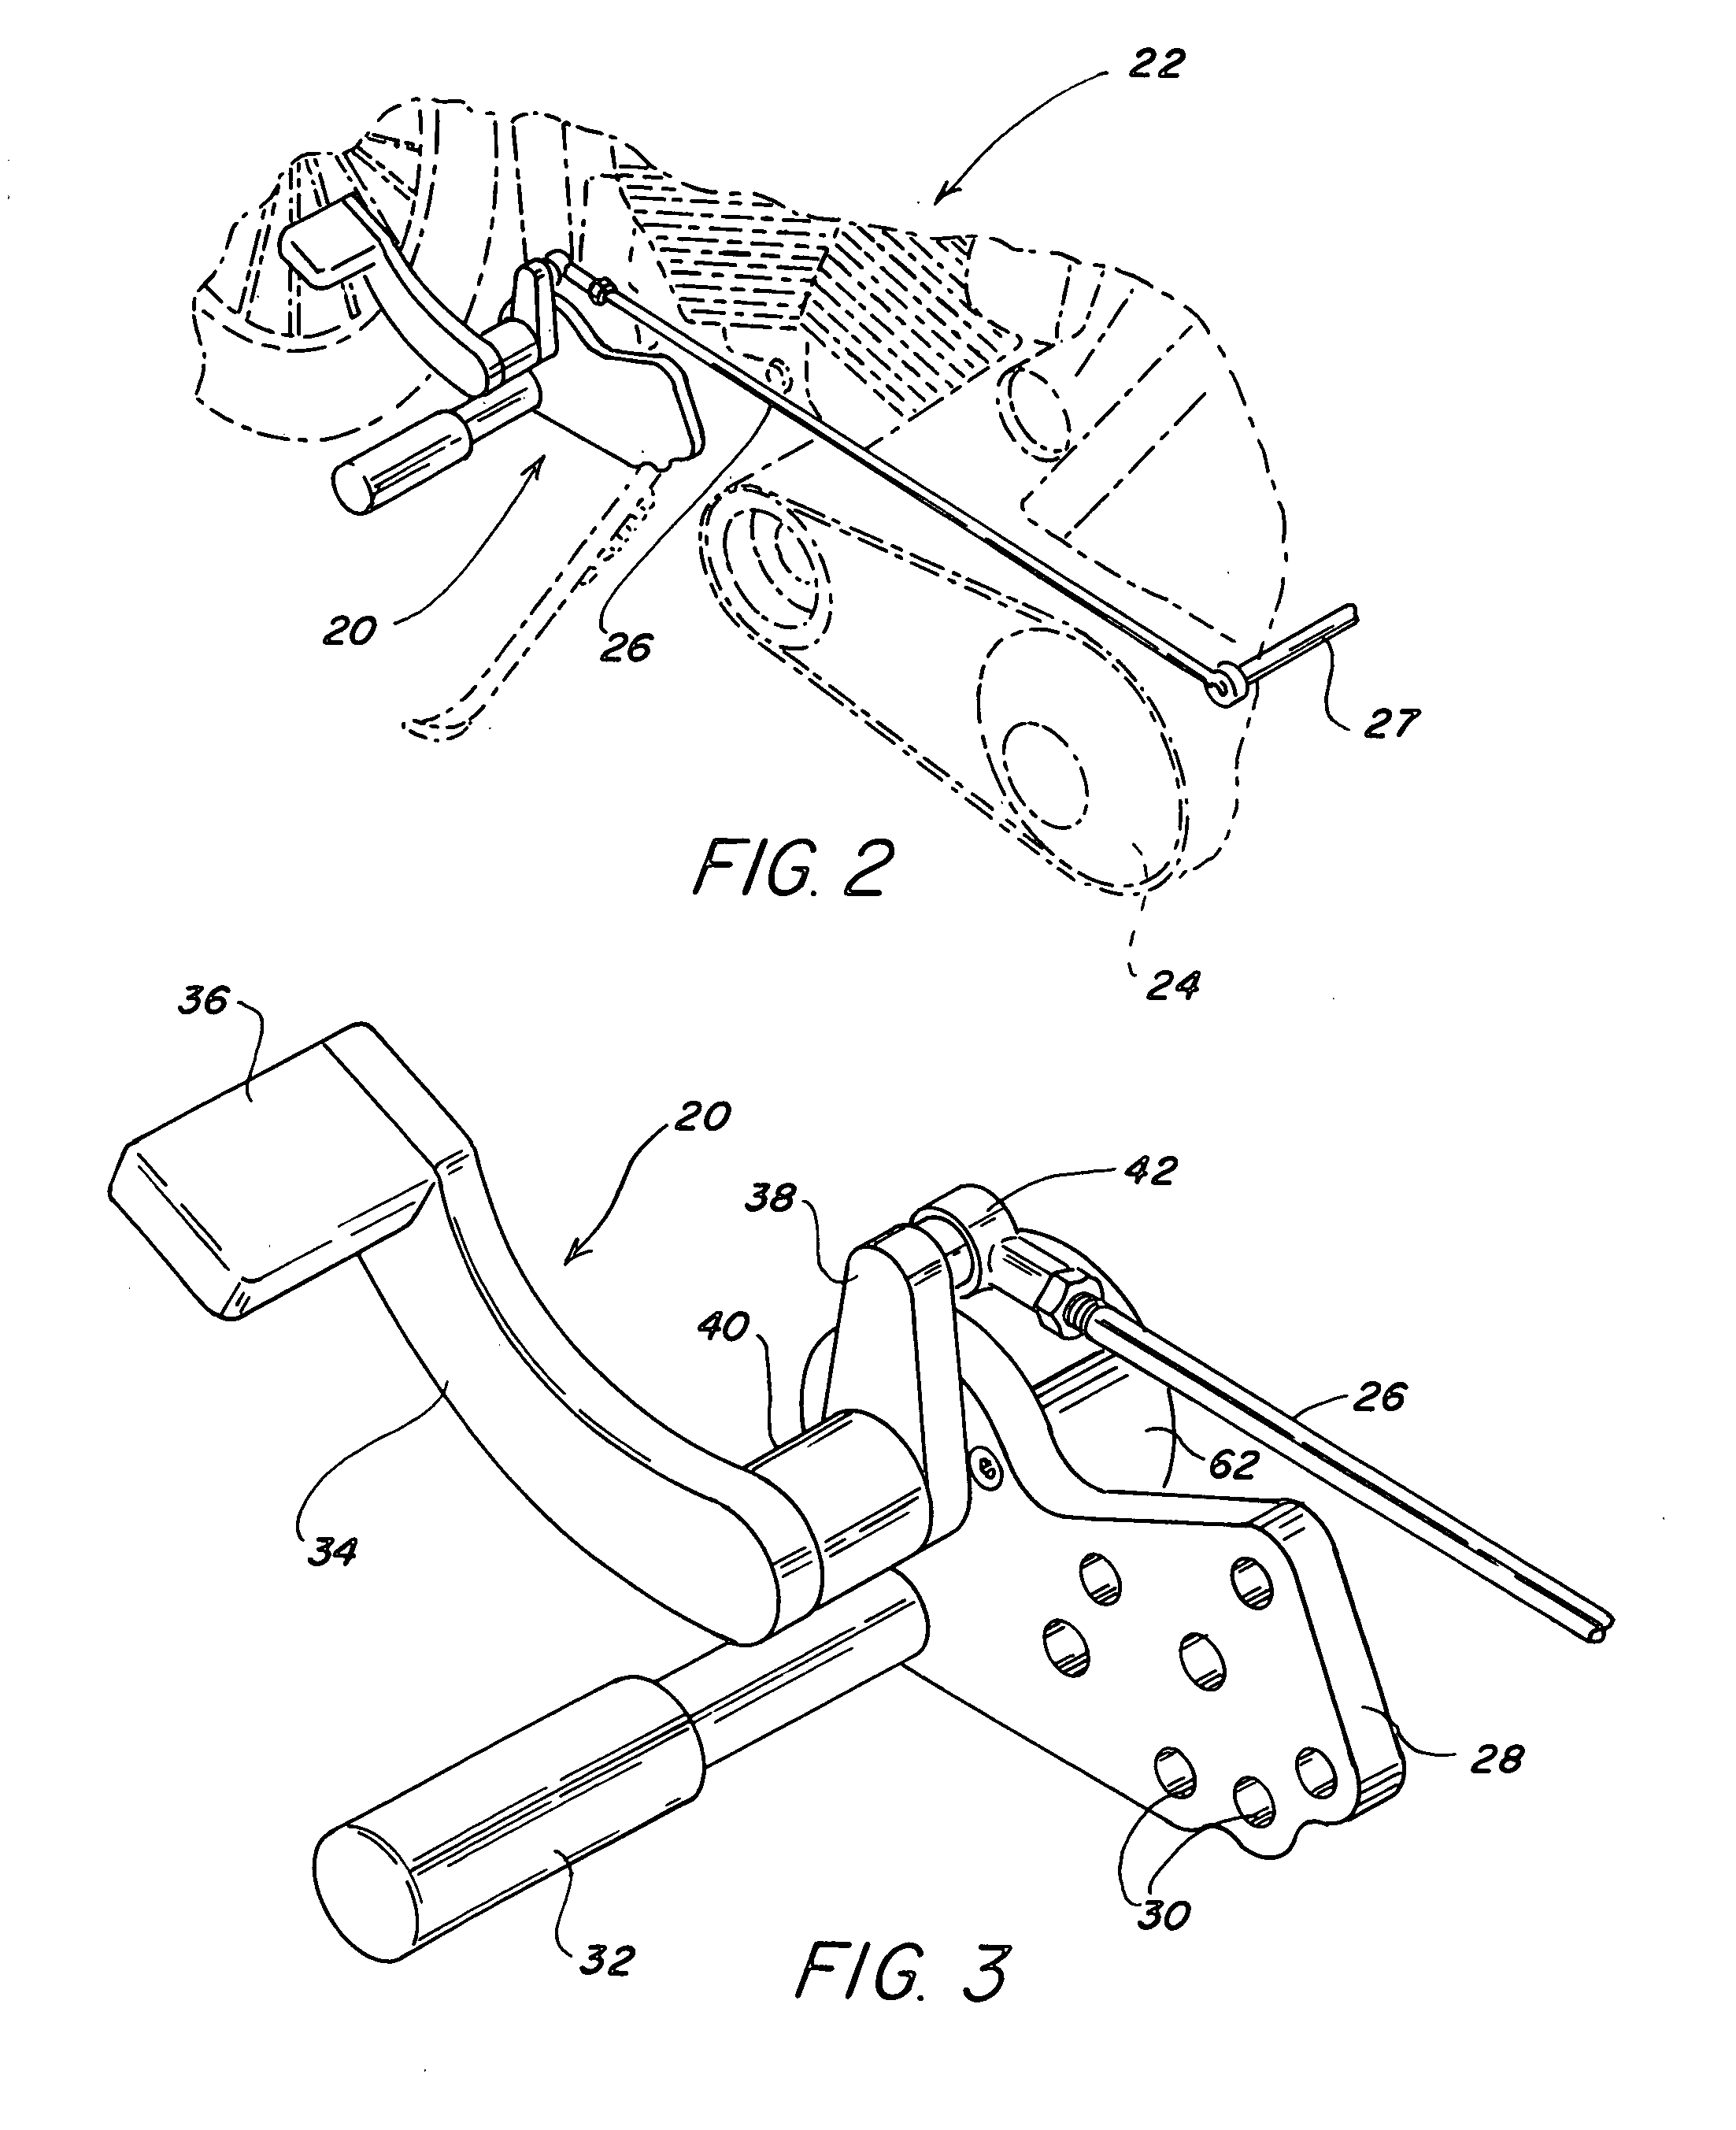 Foot operated motorcycle clutch